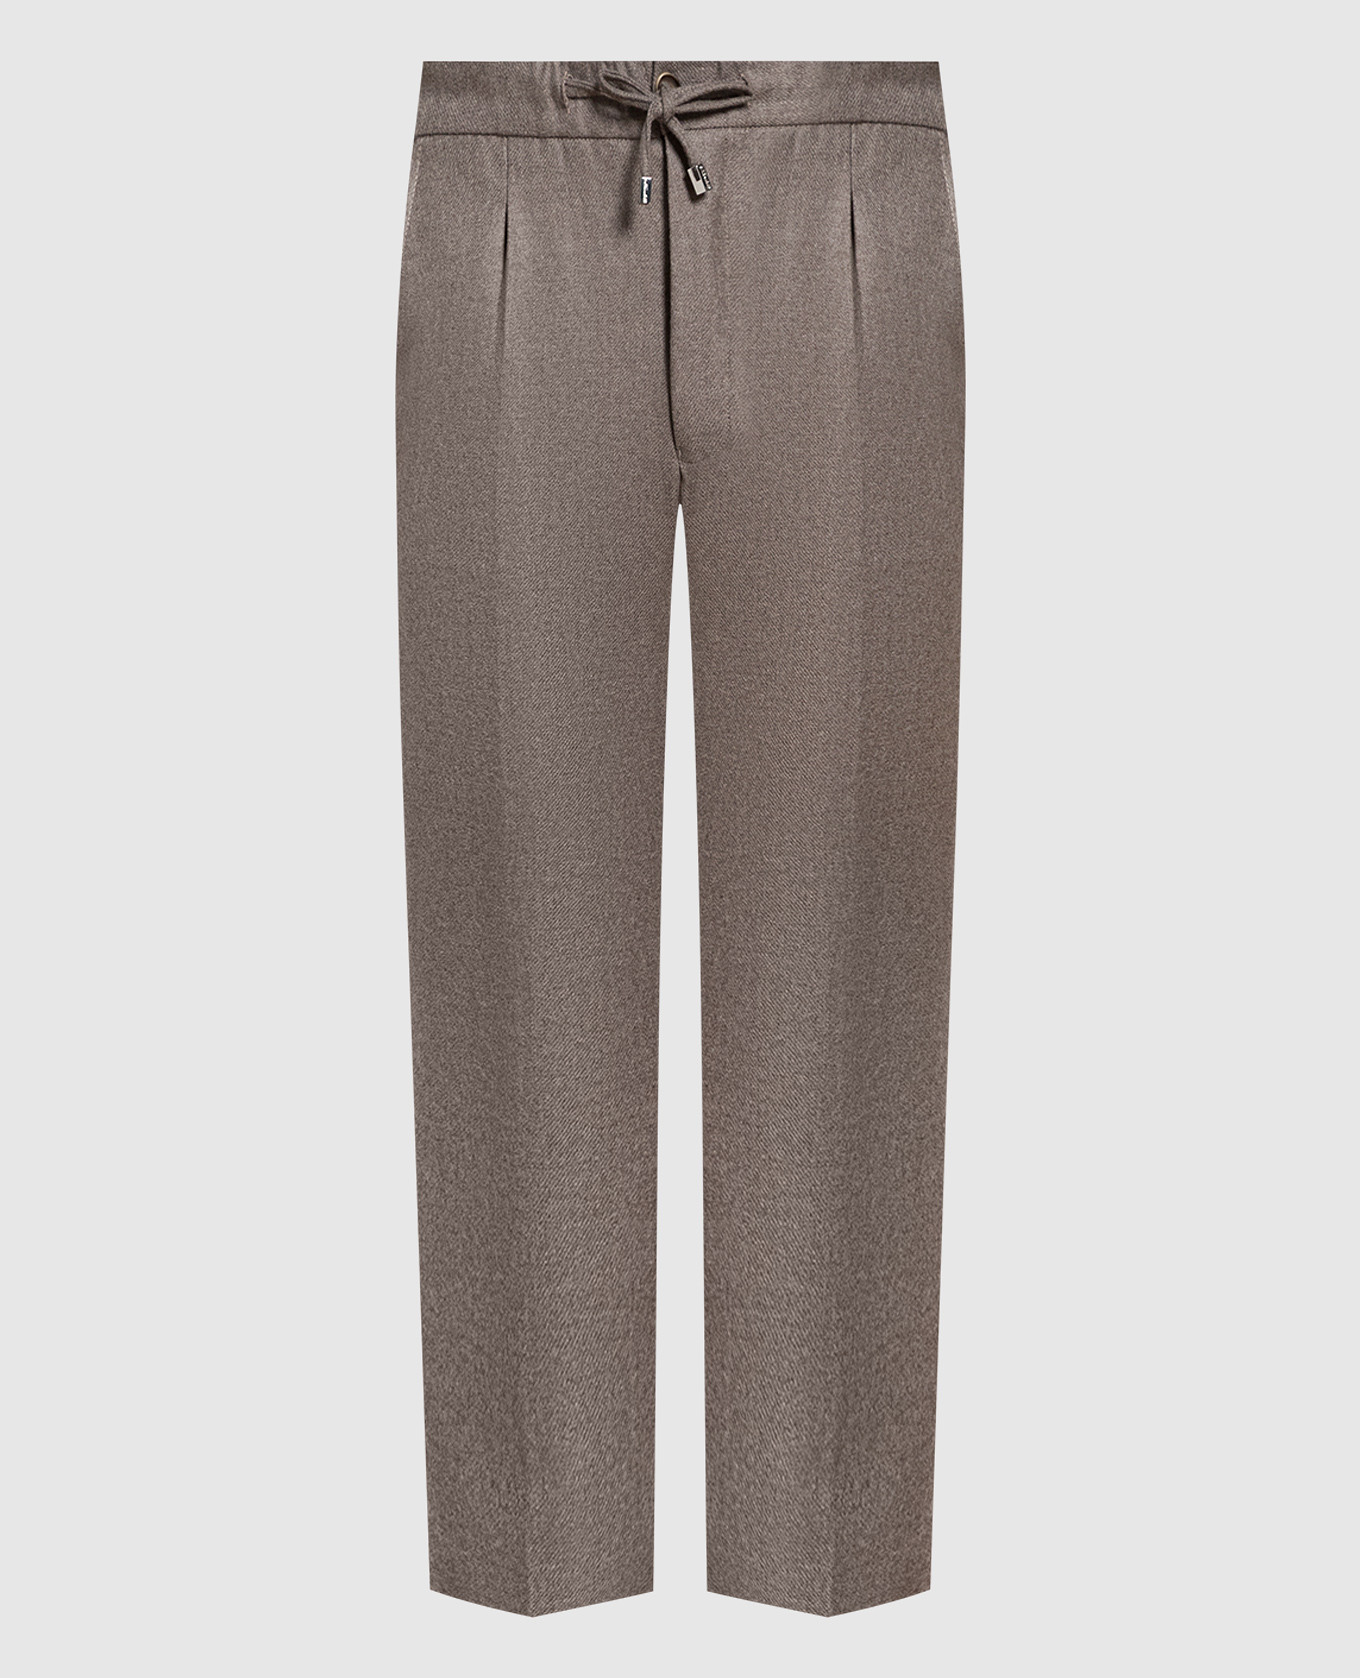 Gray pants made of wool and cashmere